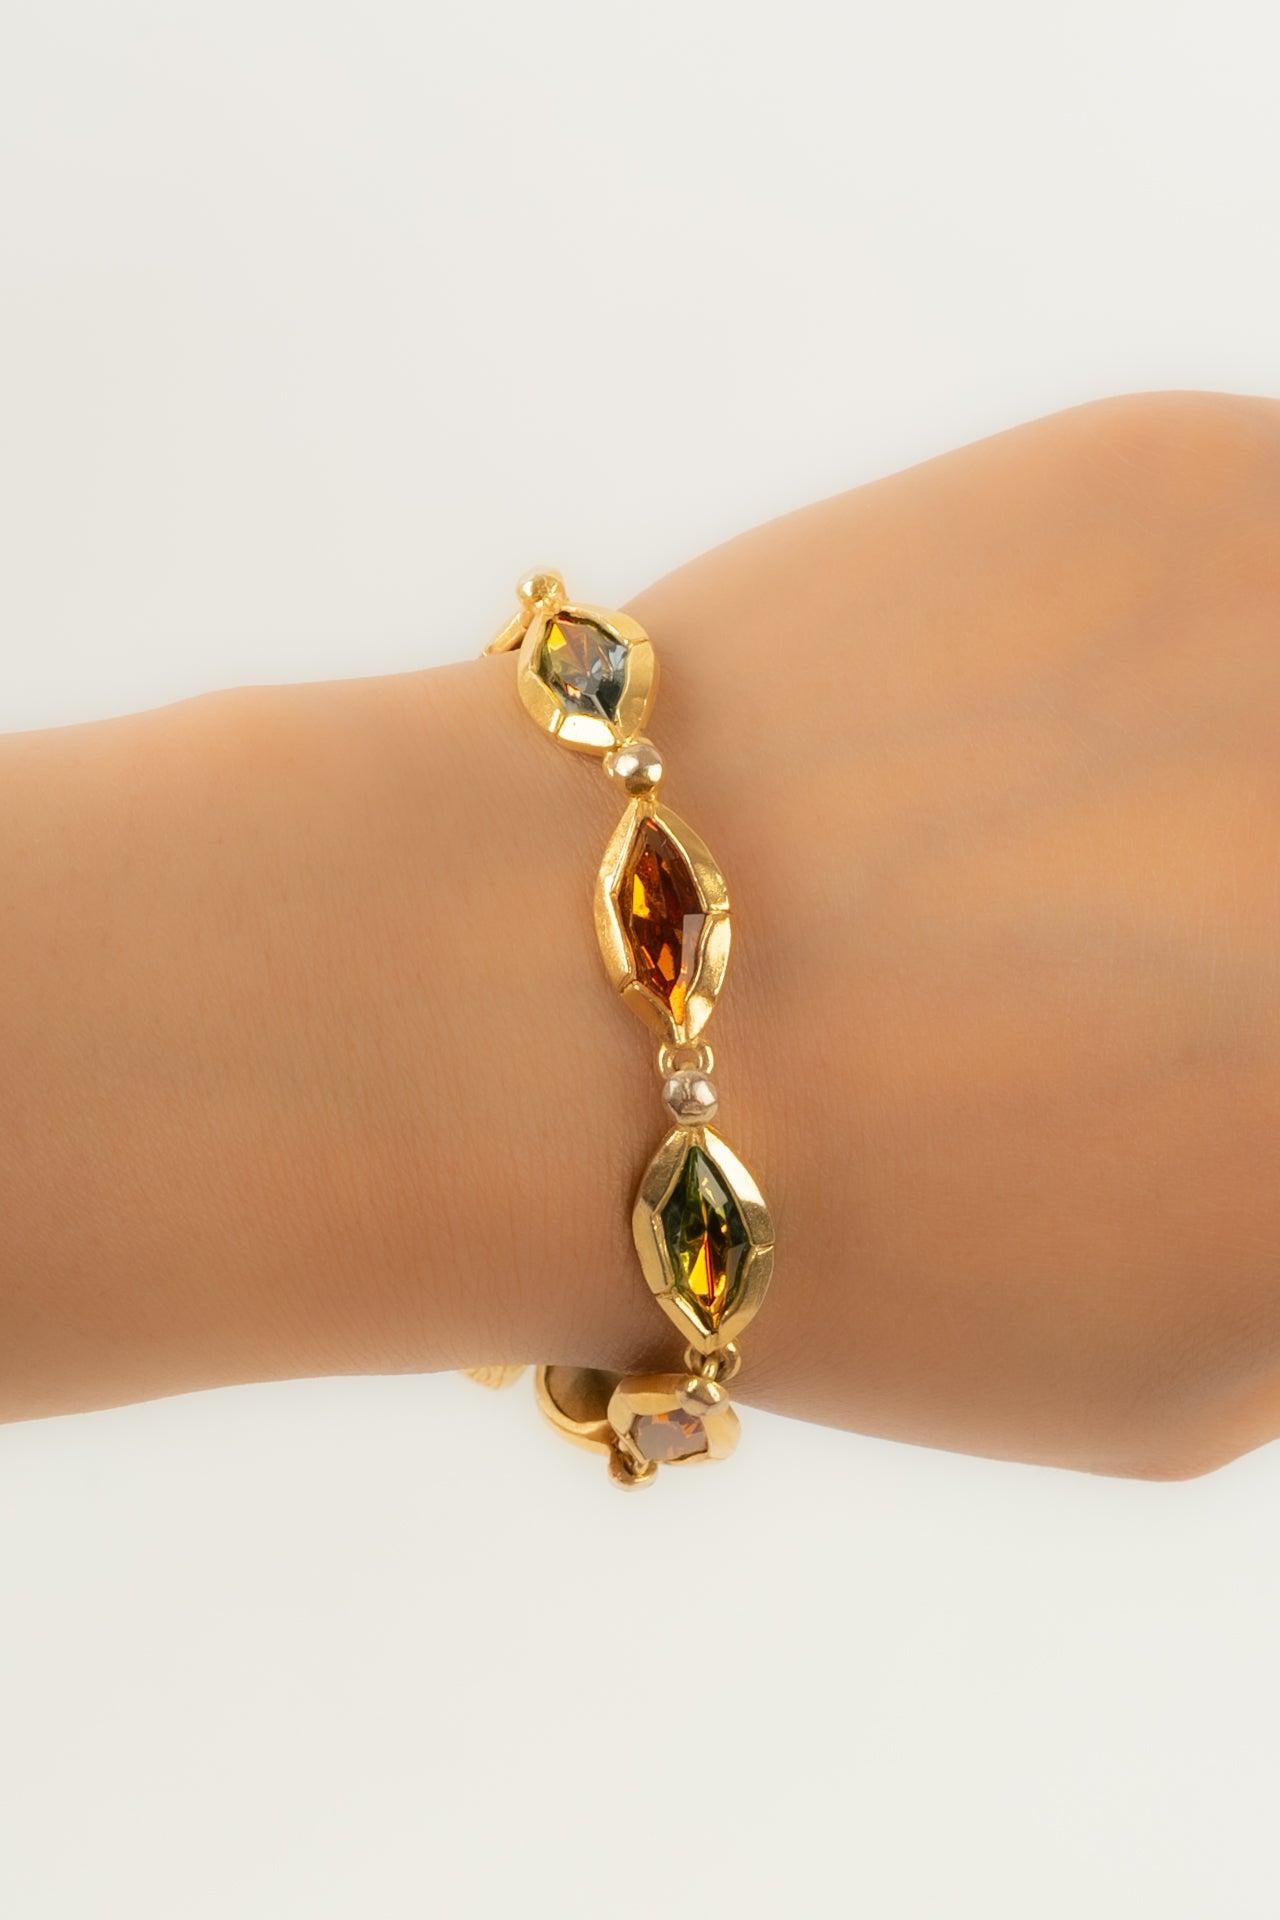 Yves Saint Laurent - Bracelet in gold-plated metal and orange rhinestones.

Additional information:
Condition: Very good condition
Dimensions: Length: from 18 cm to 20 cm

Seller Reference: BRA102
